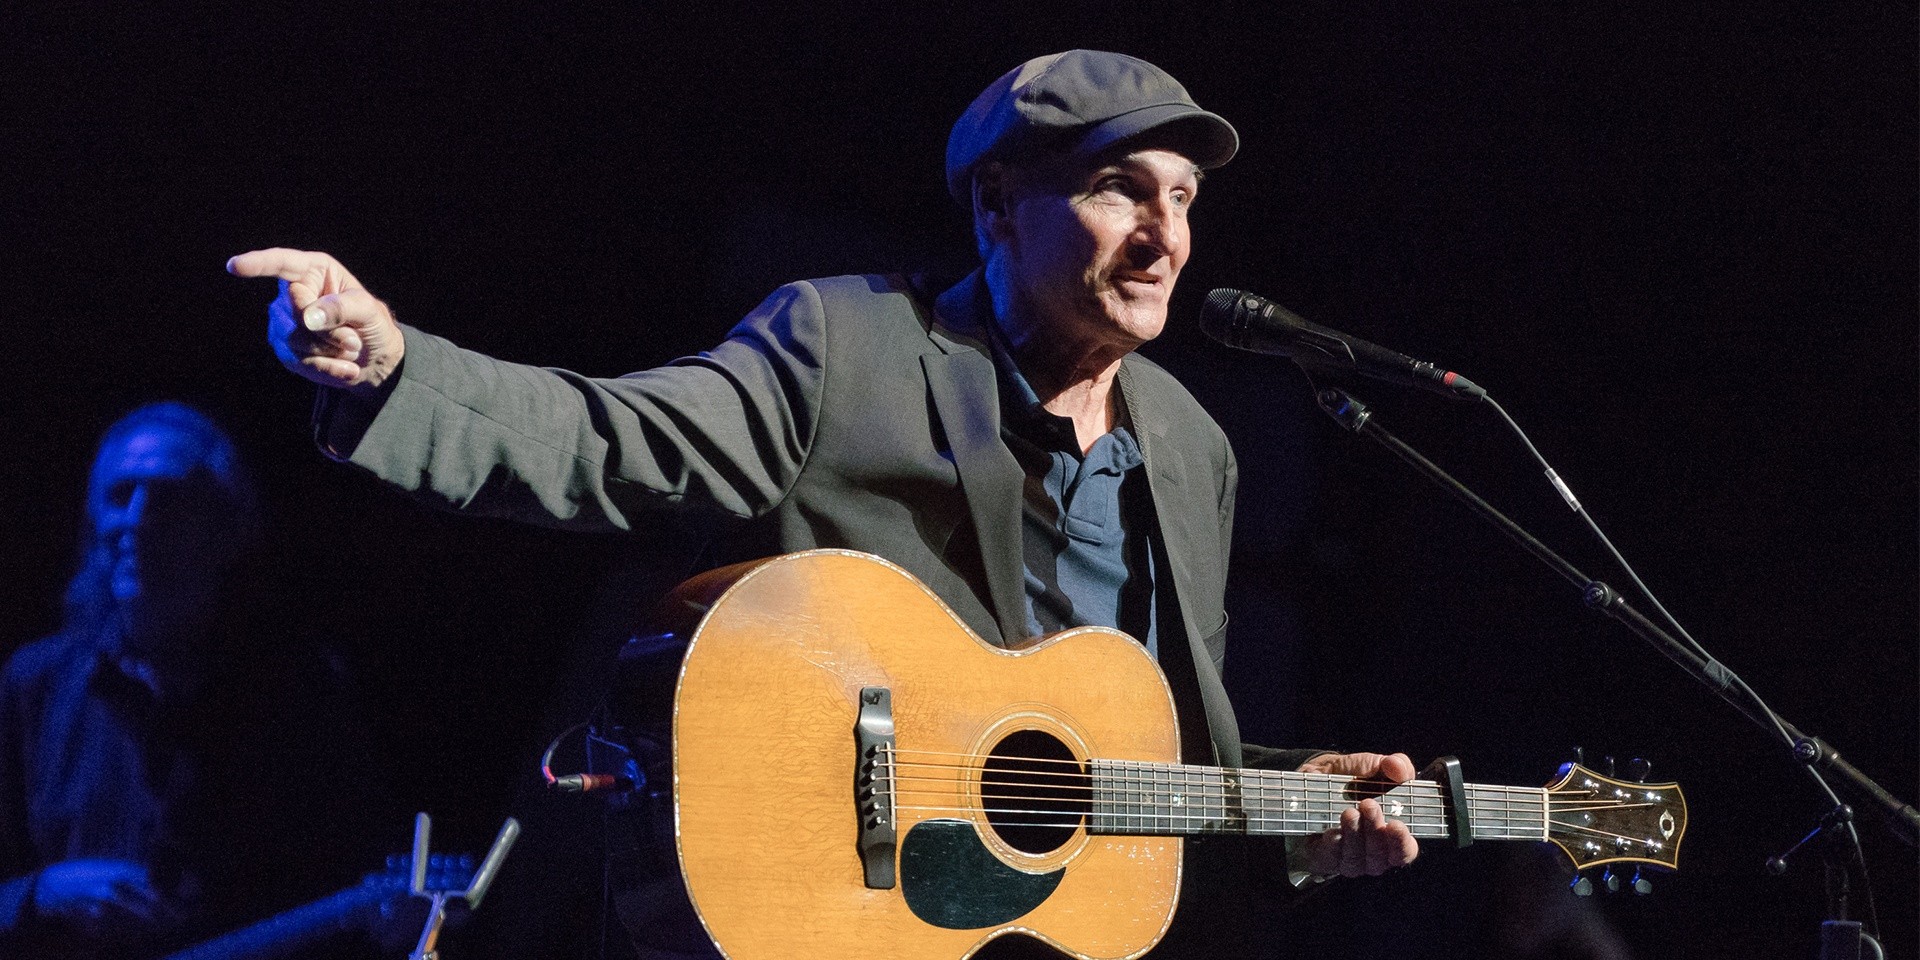 GIG REPORT: James Taylor showcases his acclaimed body of work in his recent Singapore show